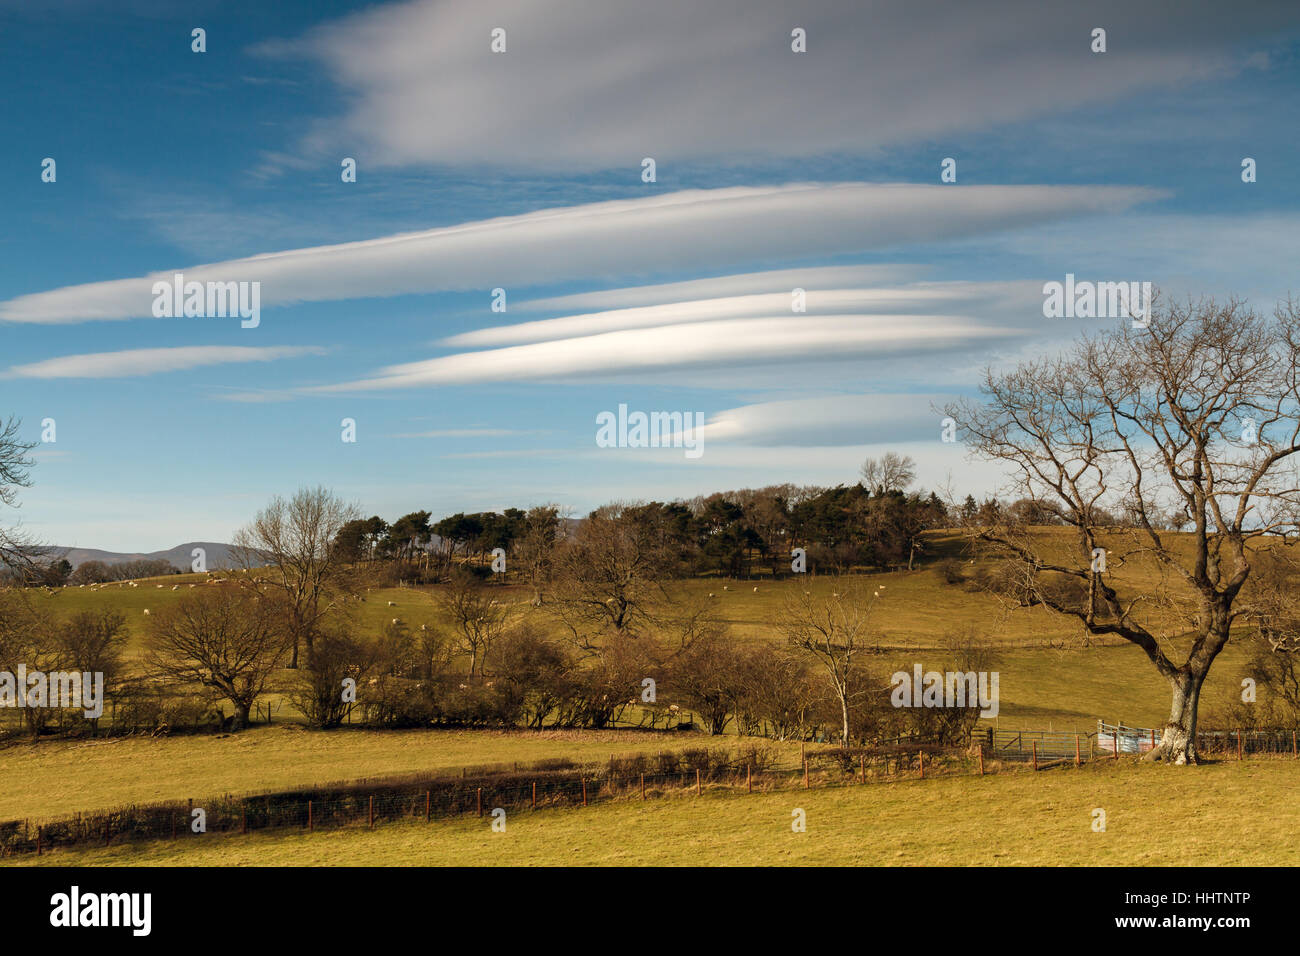 Lenticular clouds or Altocumulus lenticularis formation over a hillside landscape in North Wales during fine weather in spring Stock Photo